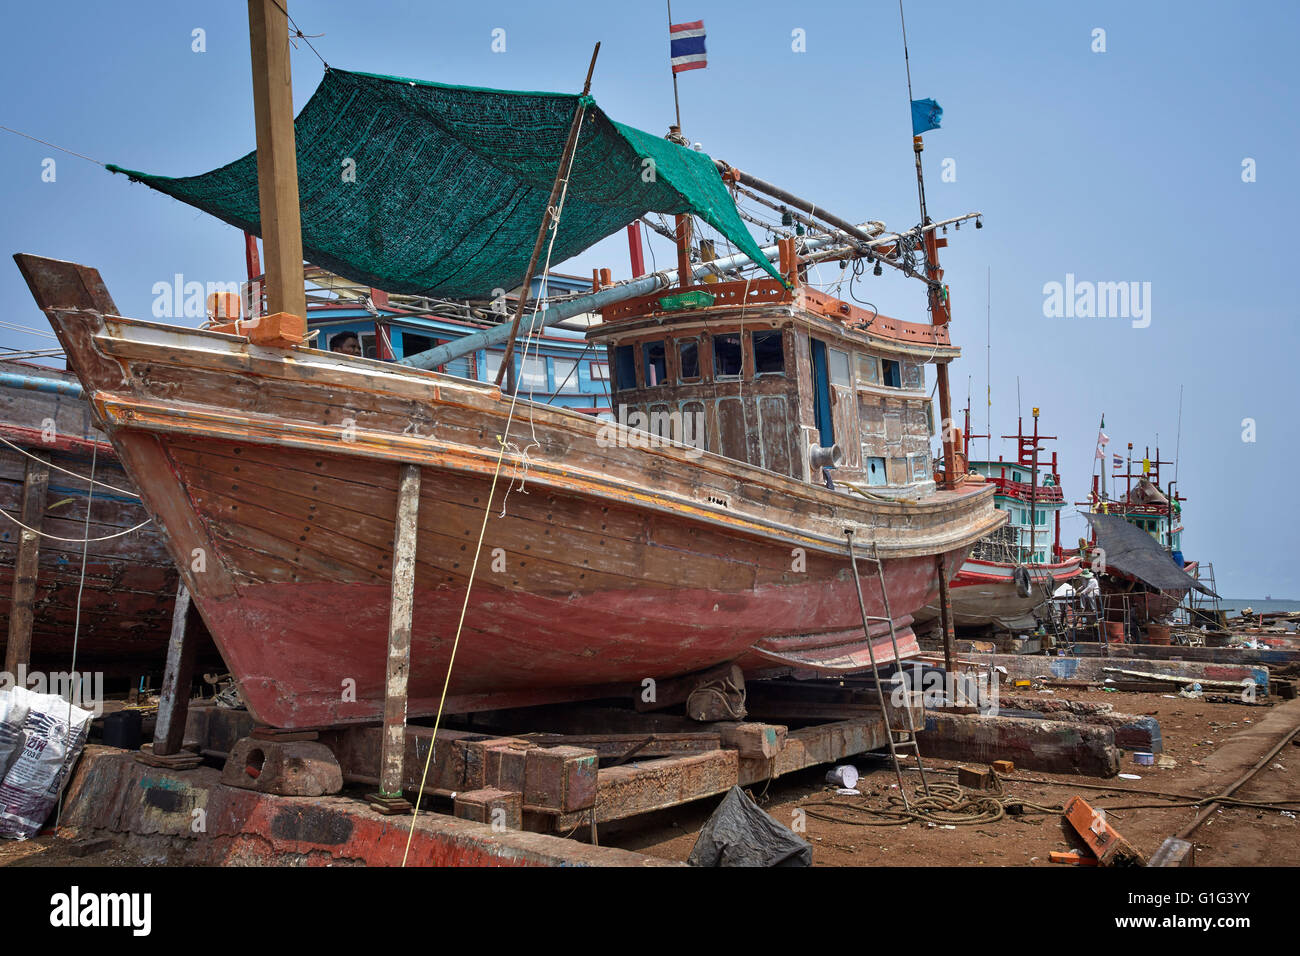 Traditional Thai wooden commercial fishing boat undergoing repair